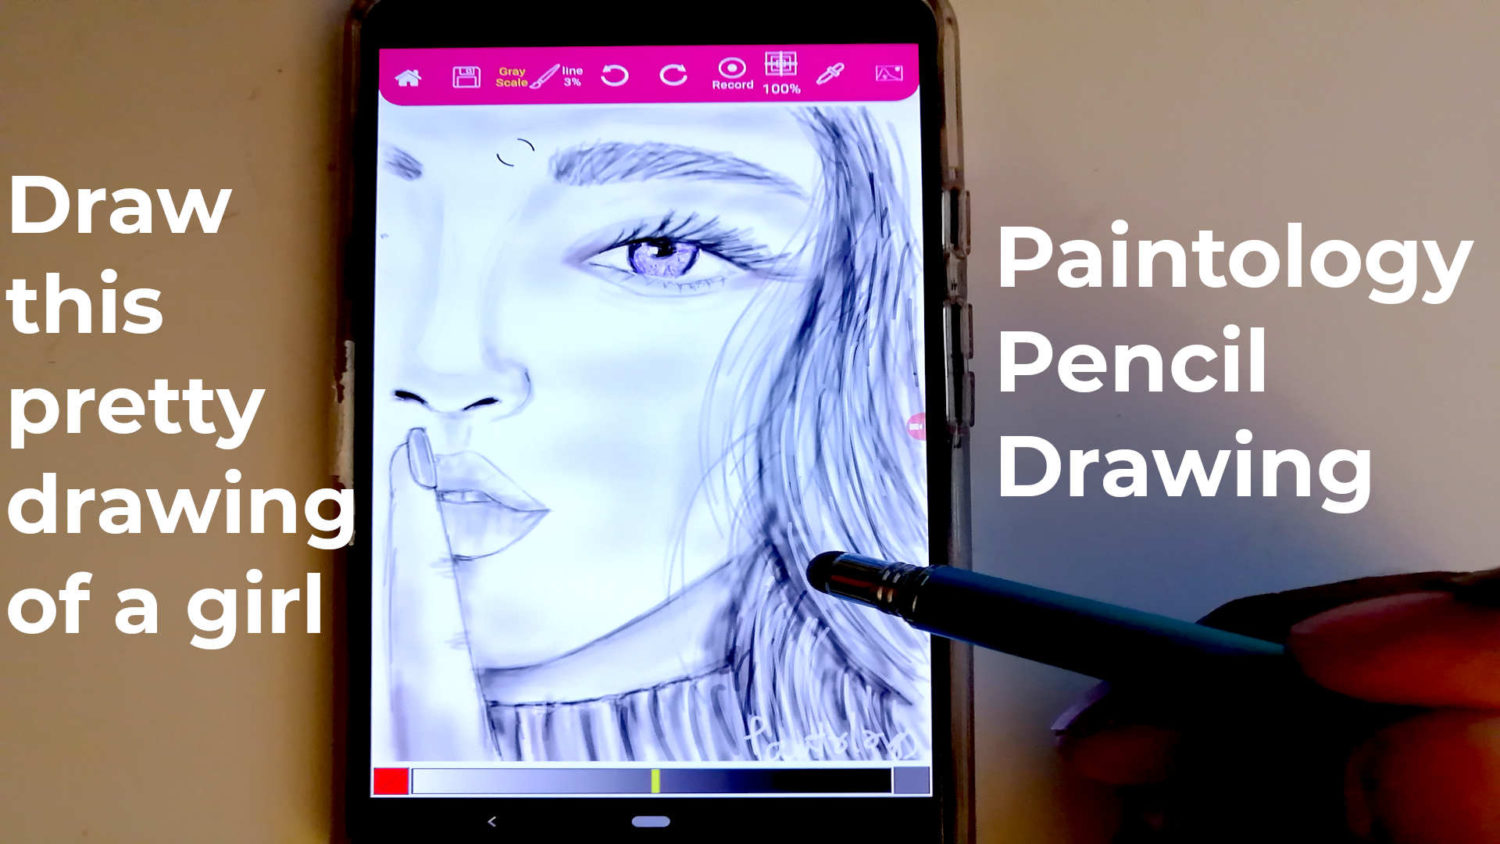 Draw a purple eyed girl - Paintology Pencil App